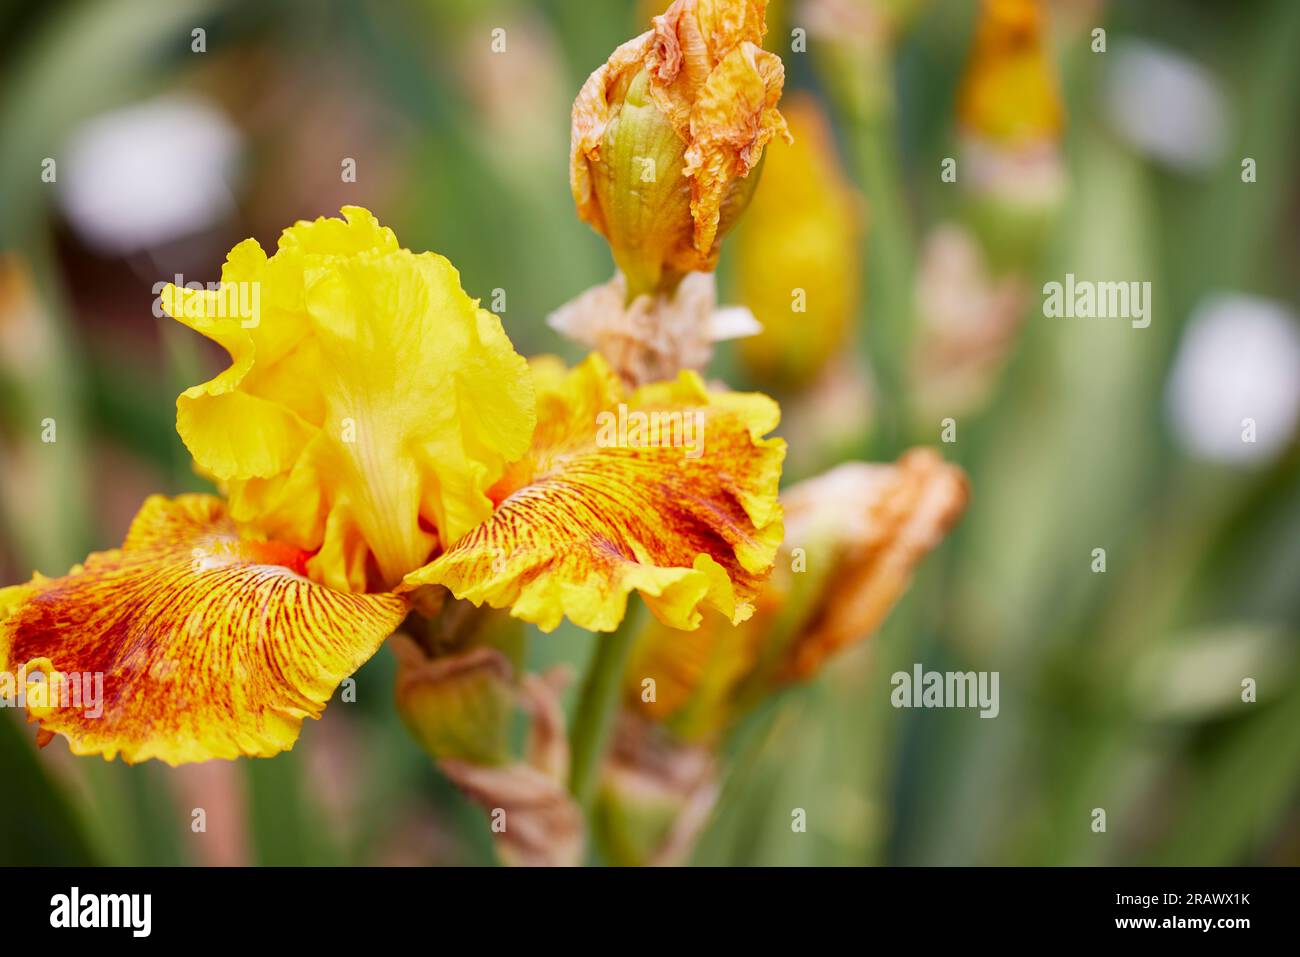 Close up of a Calizona Gold Iris Flower and Buds with Shallow depth of Field Stock Photo